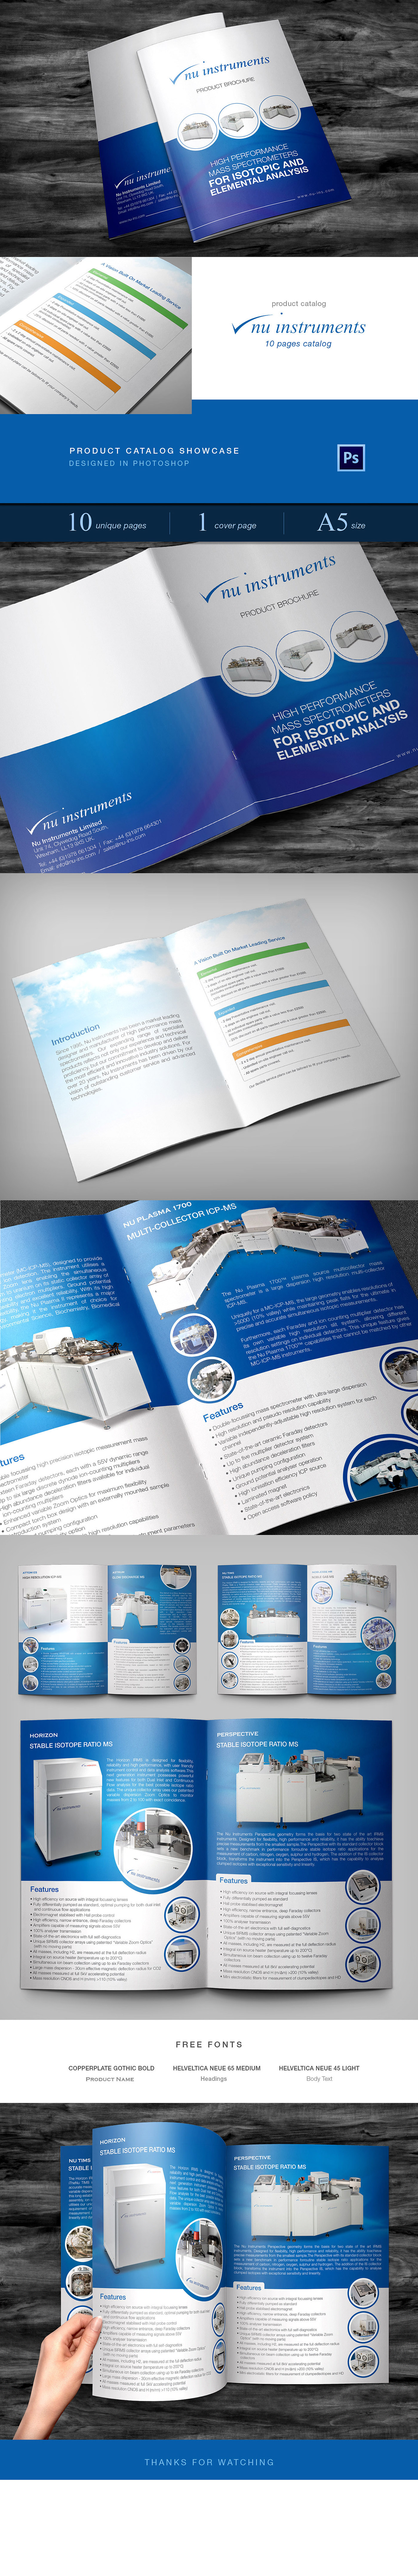 brochure instrument flyer Booklet Guide book cover Illustrator photoshop print Work  Layout InDesign product